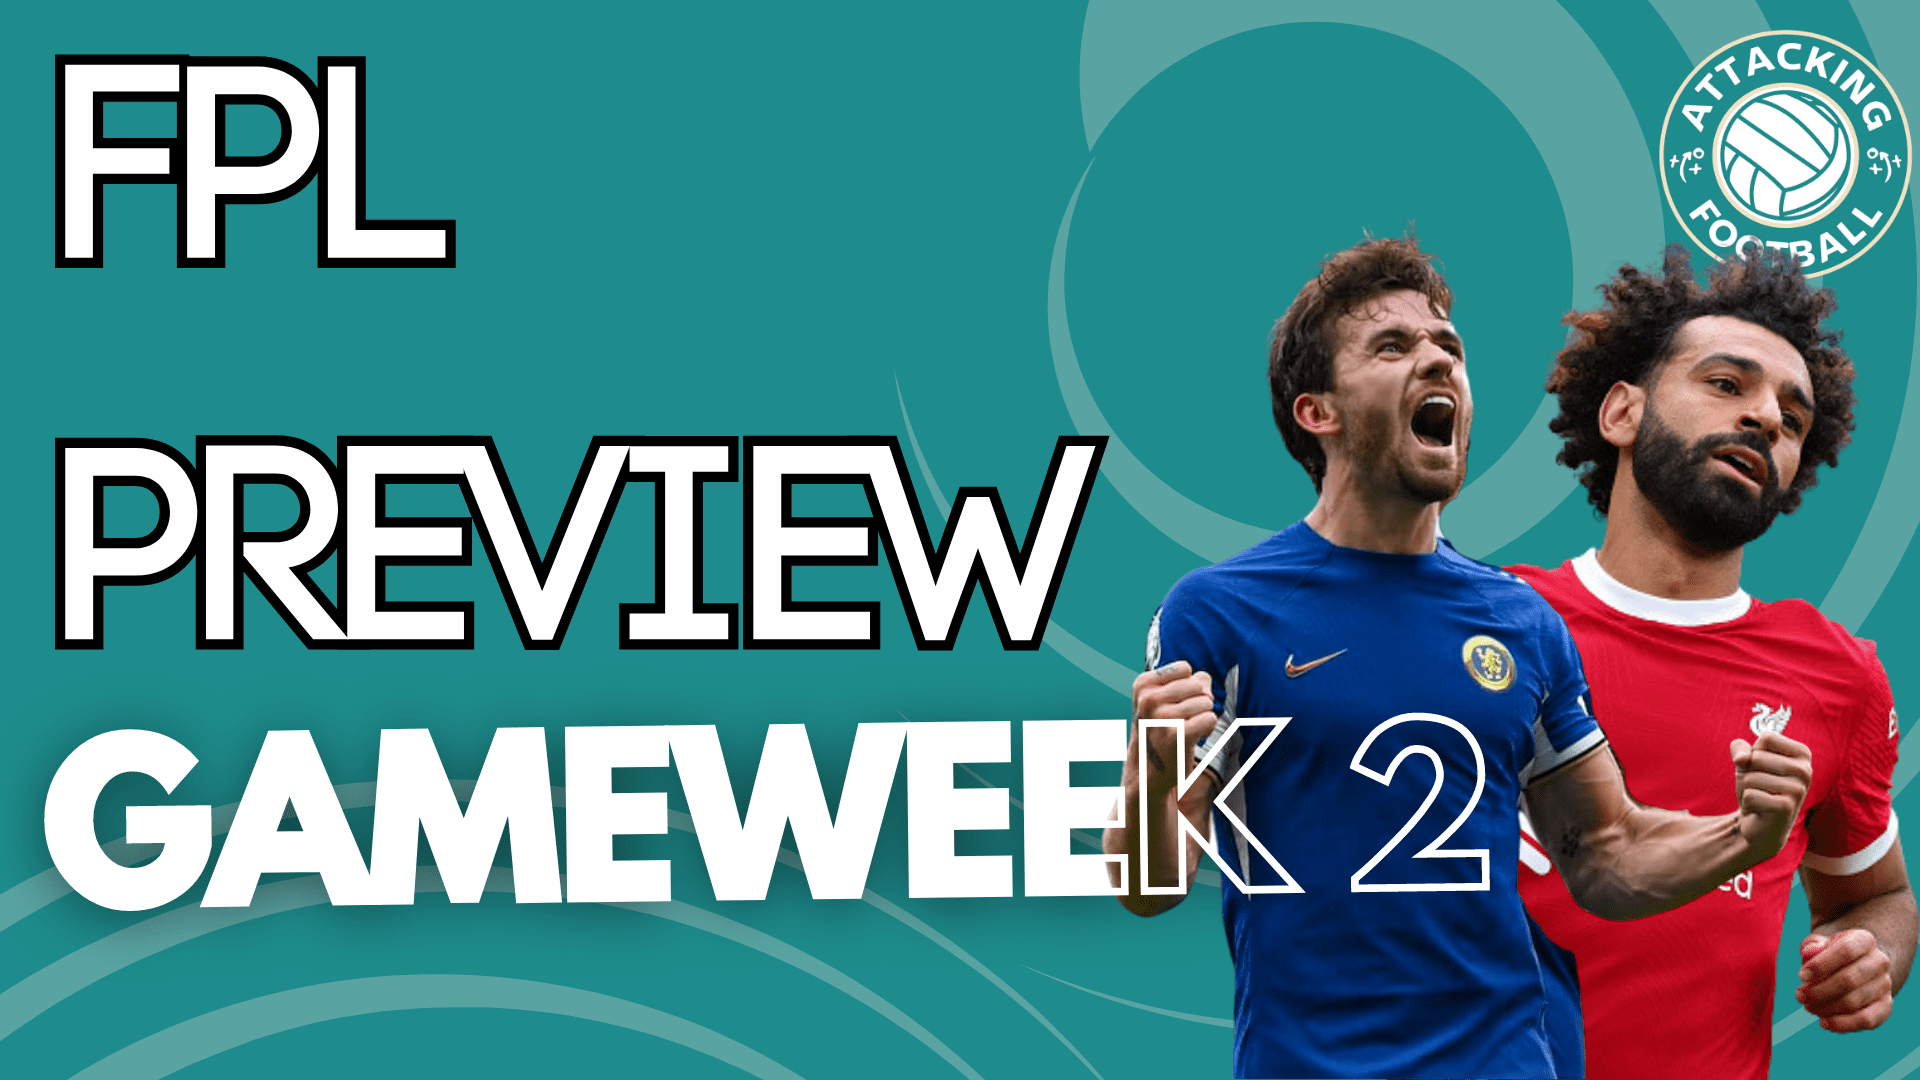 FPL Gameweek 2 Preview